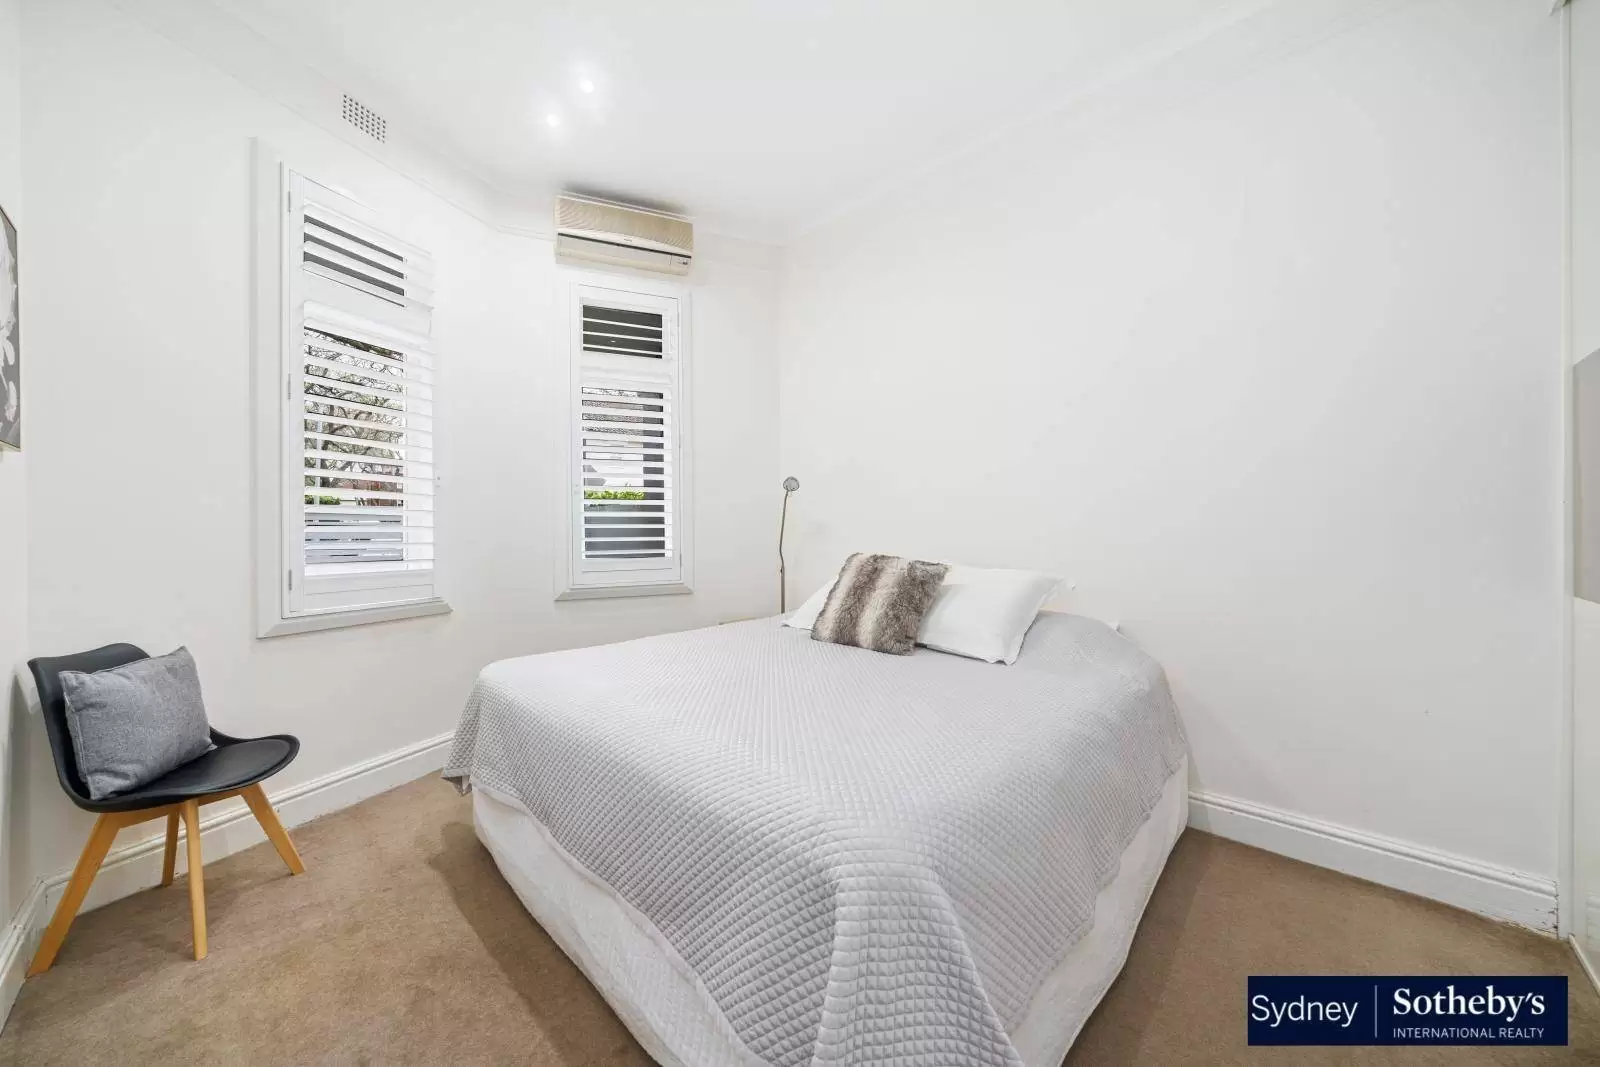 9 Pearce Street, Double Bay Leased by Sydney Sotheby's International Realty - image 9